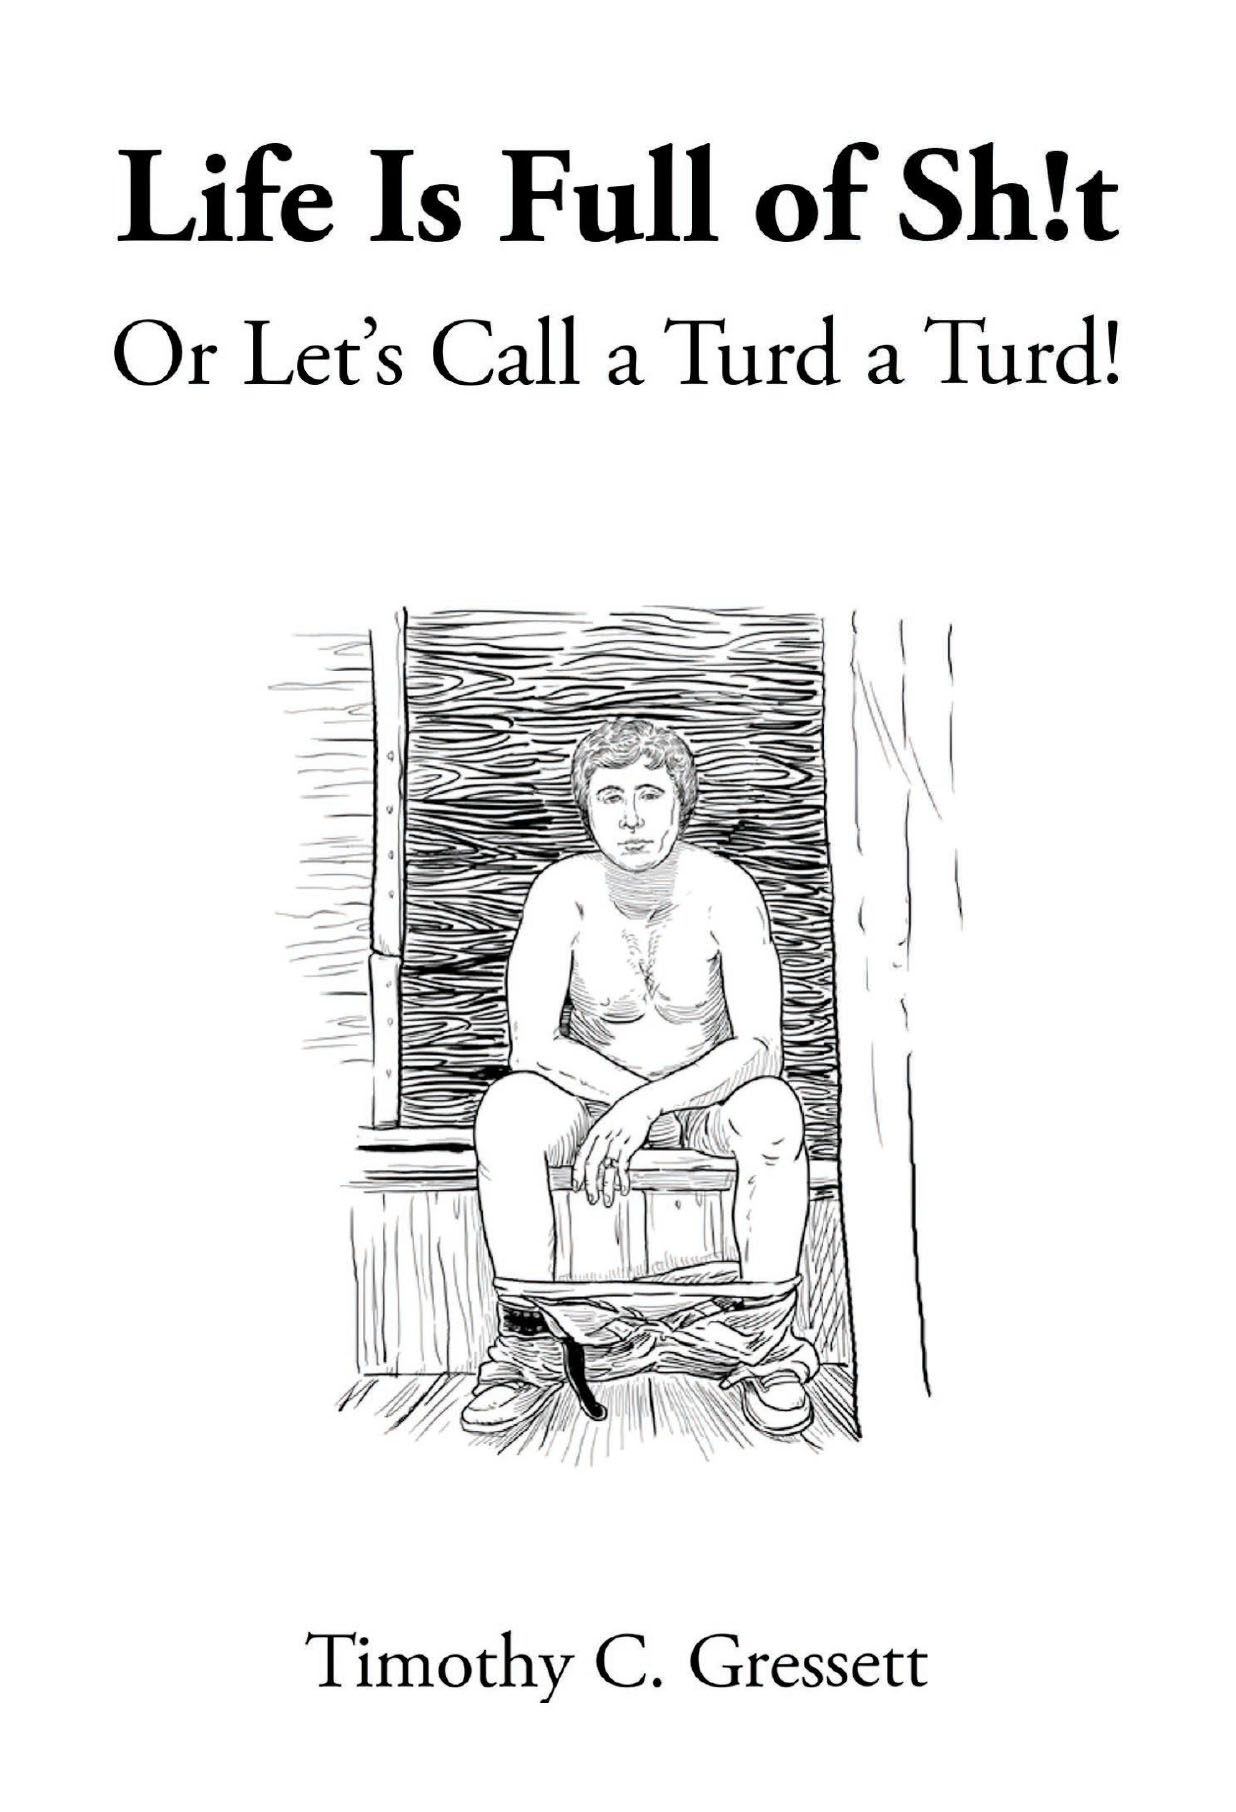 Timothy C. Gressett’s New Book, “Life Is Full Of Sh!t Or Let's Call a Turd a Turd!” Explores the Ups and Downs of Life, as Told Through the Acts of Going Number Two